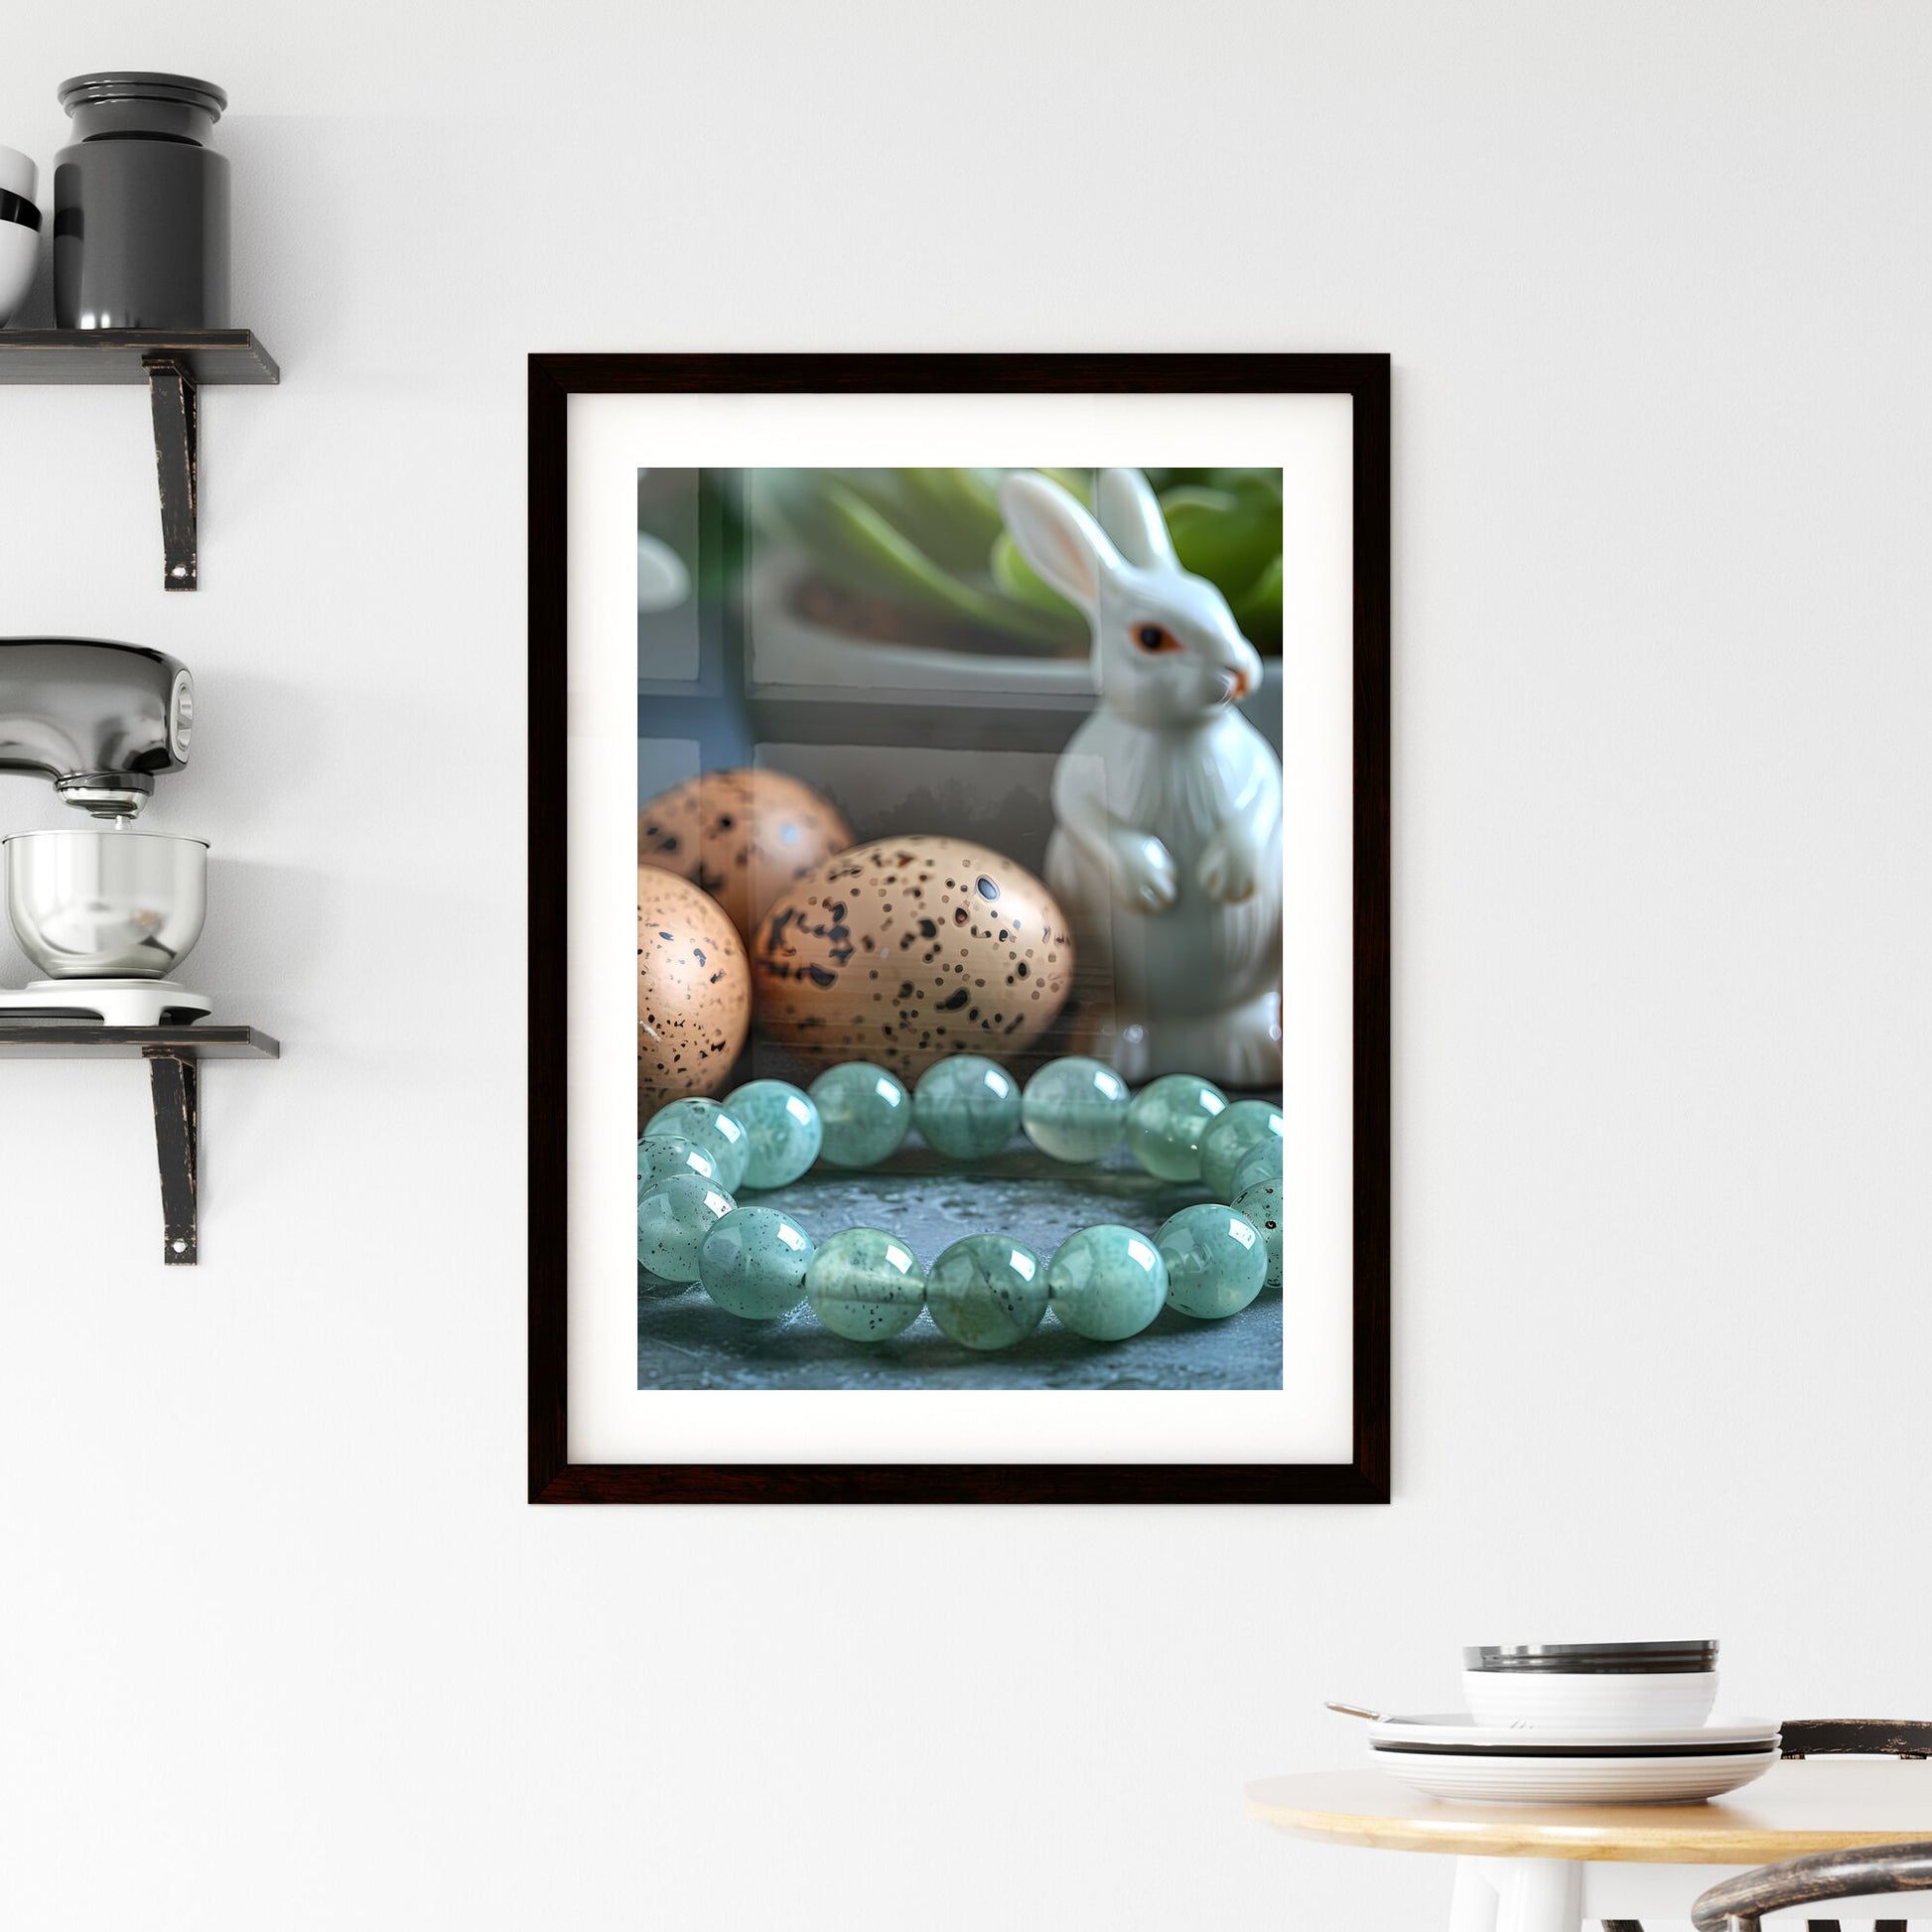 Vibrant art featuring Easter bunny figurines, eggs, and a pastel green glass bangle bracelet Default Title